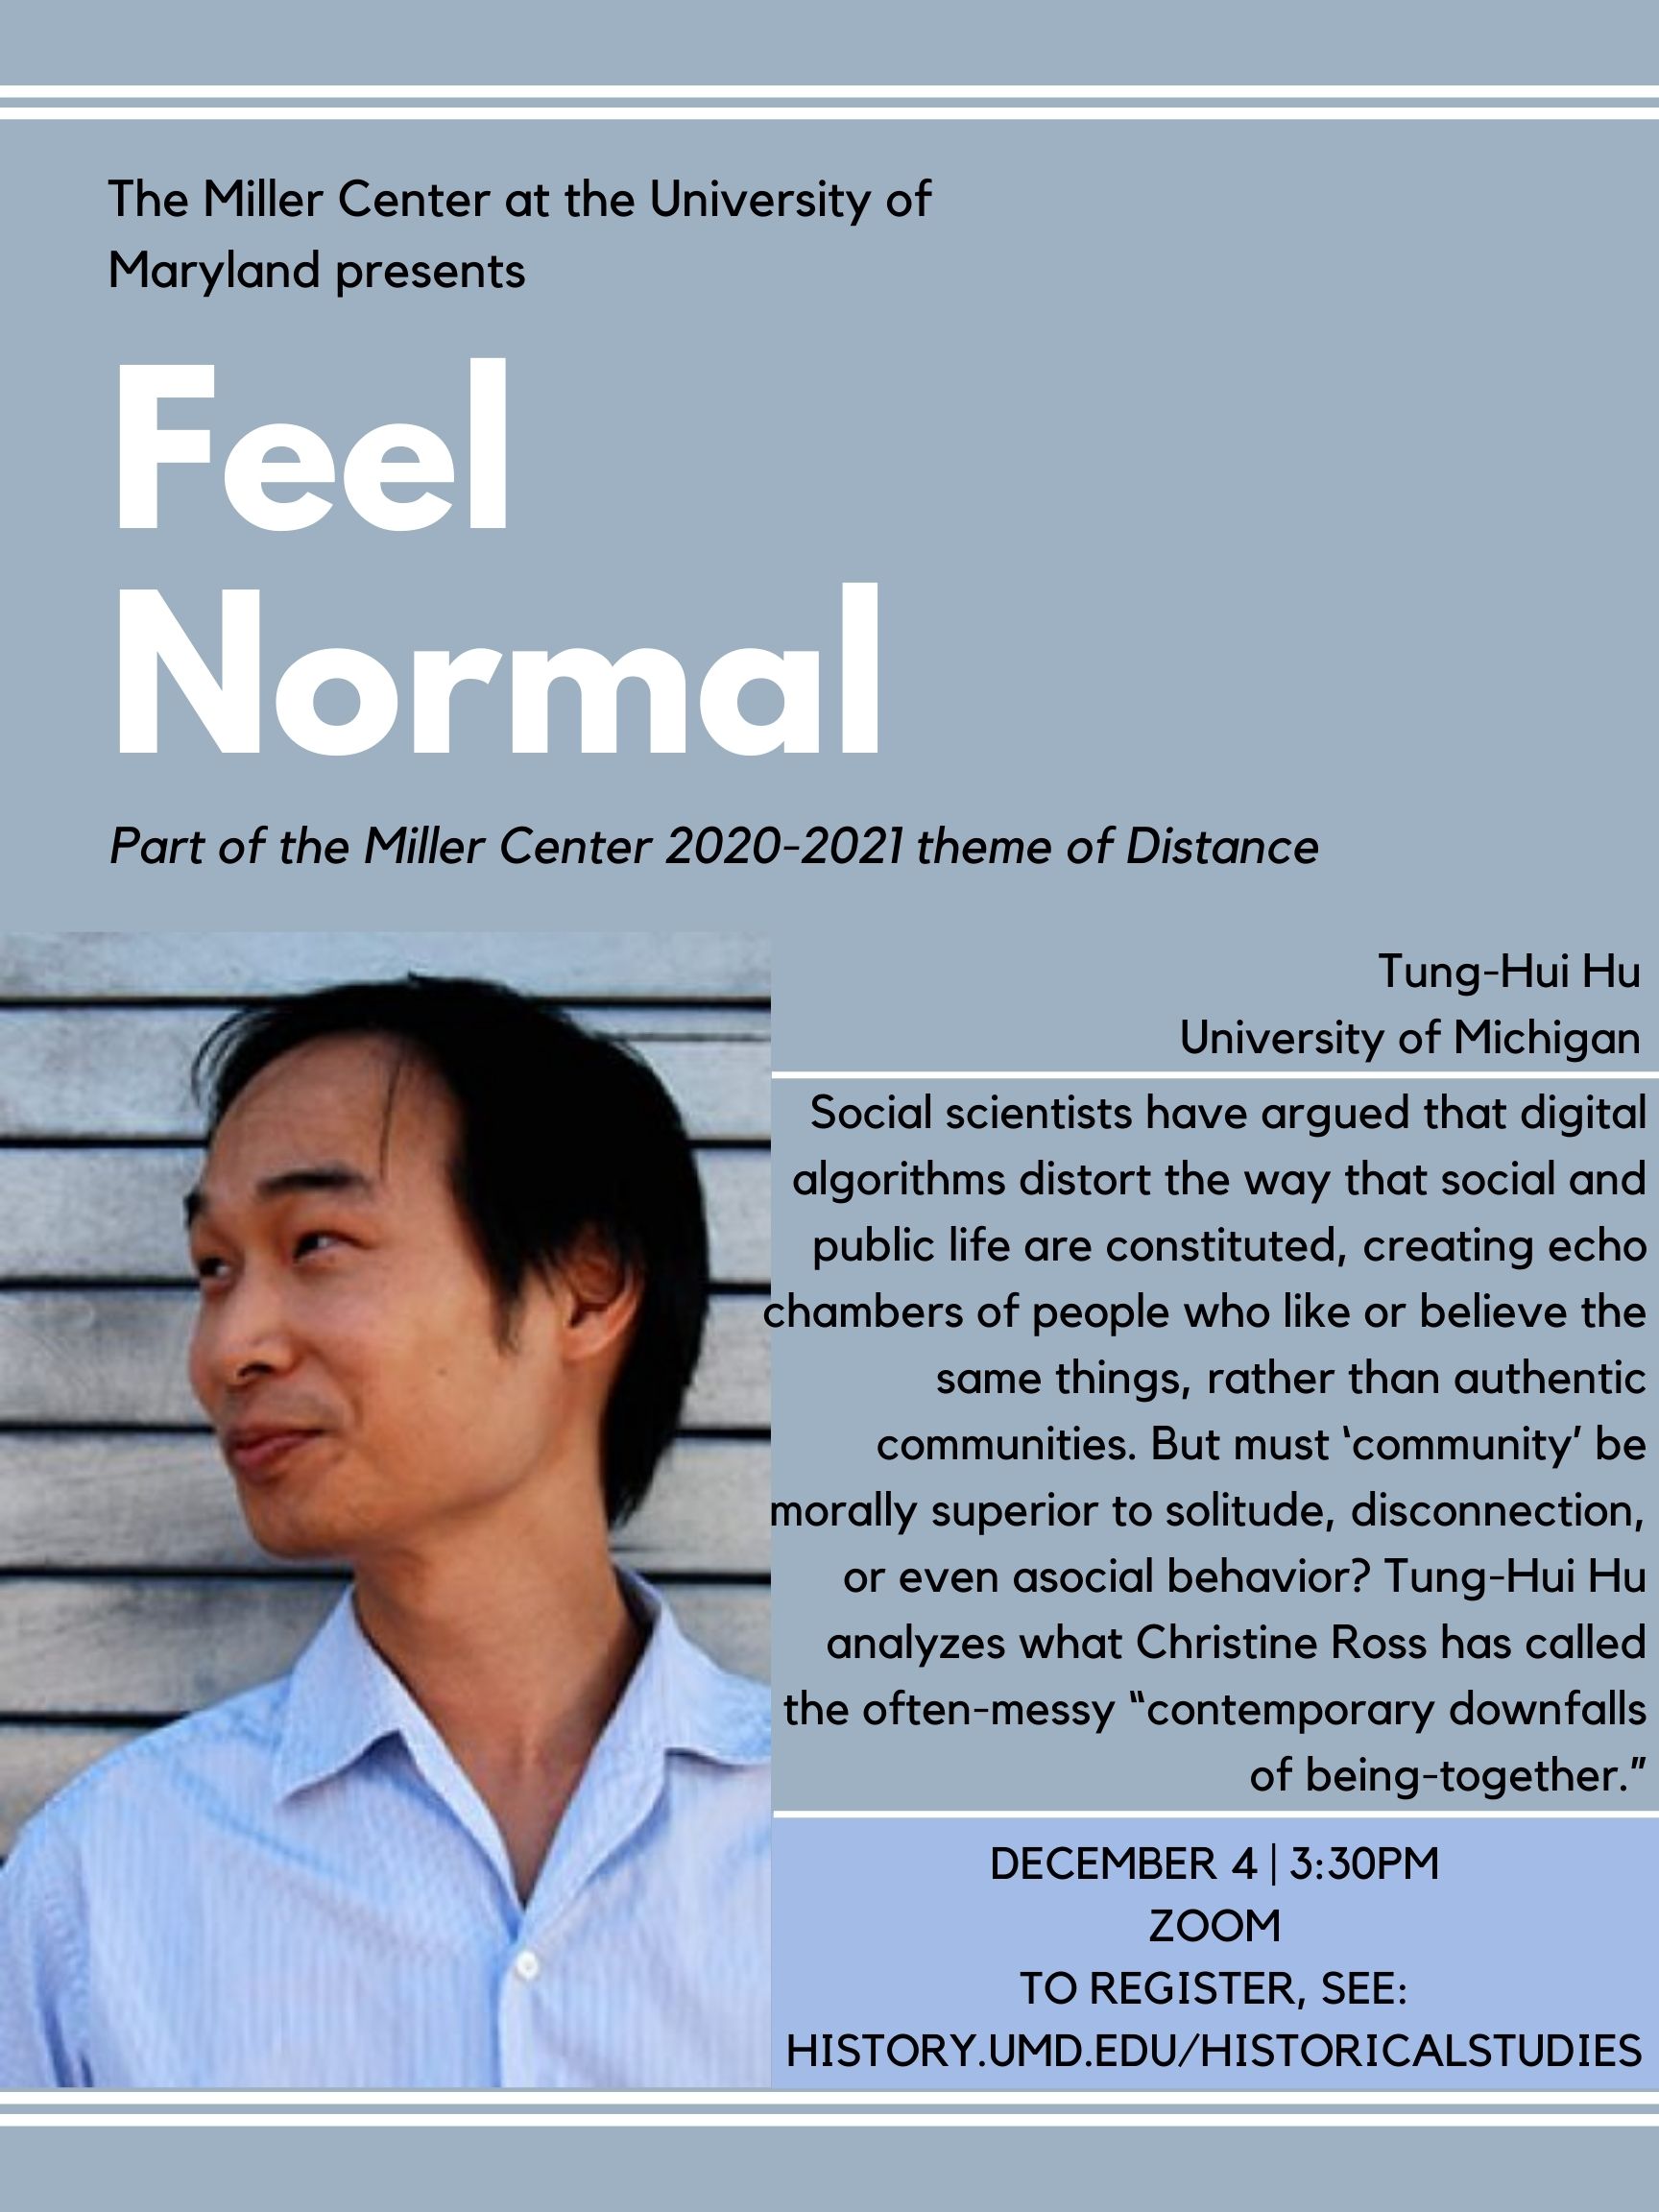 Image for event - Miller Center: "Feel Normal," presented by Tung-Hui Hu